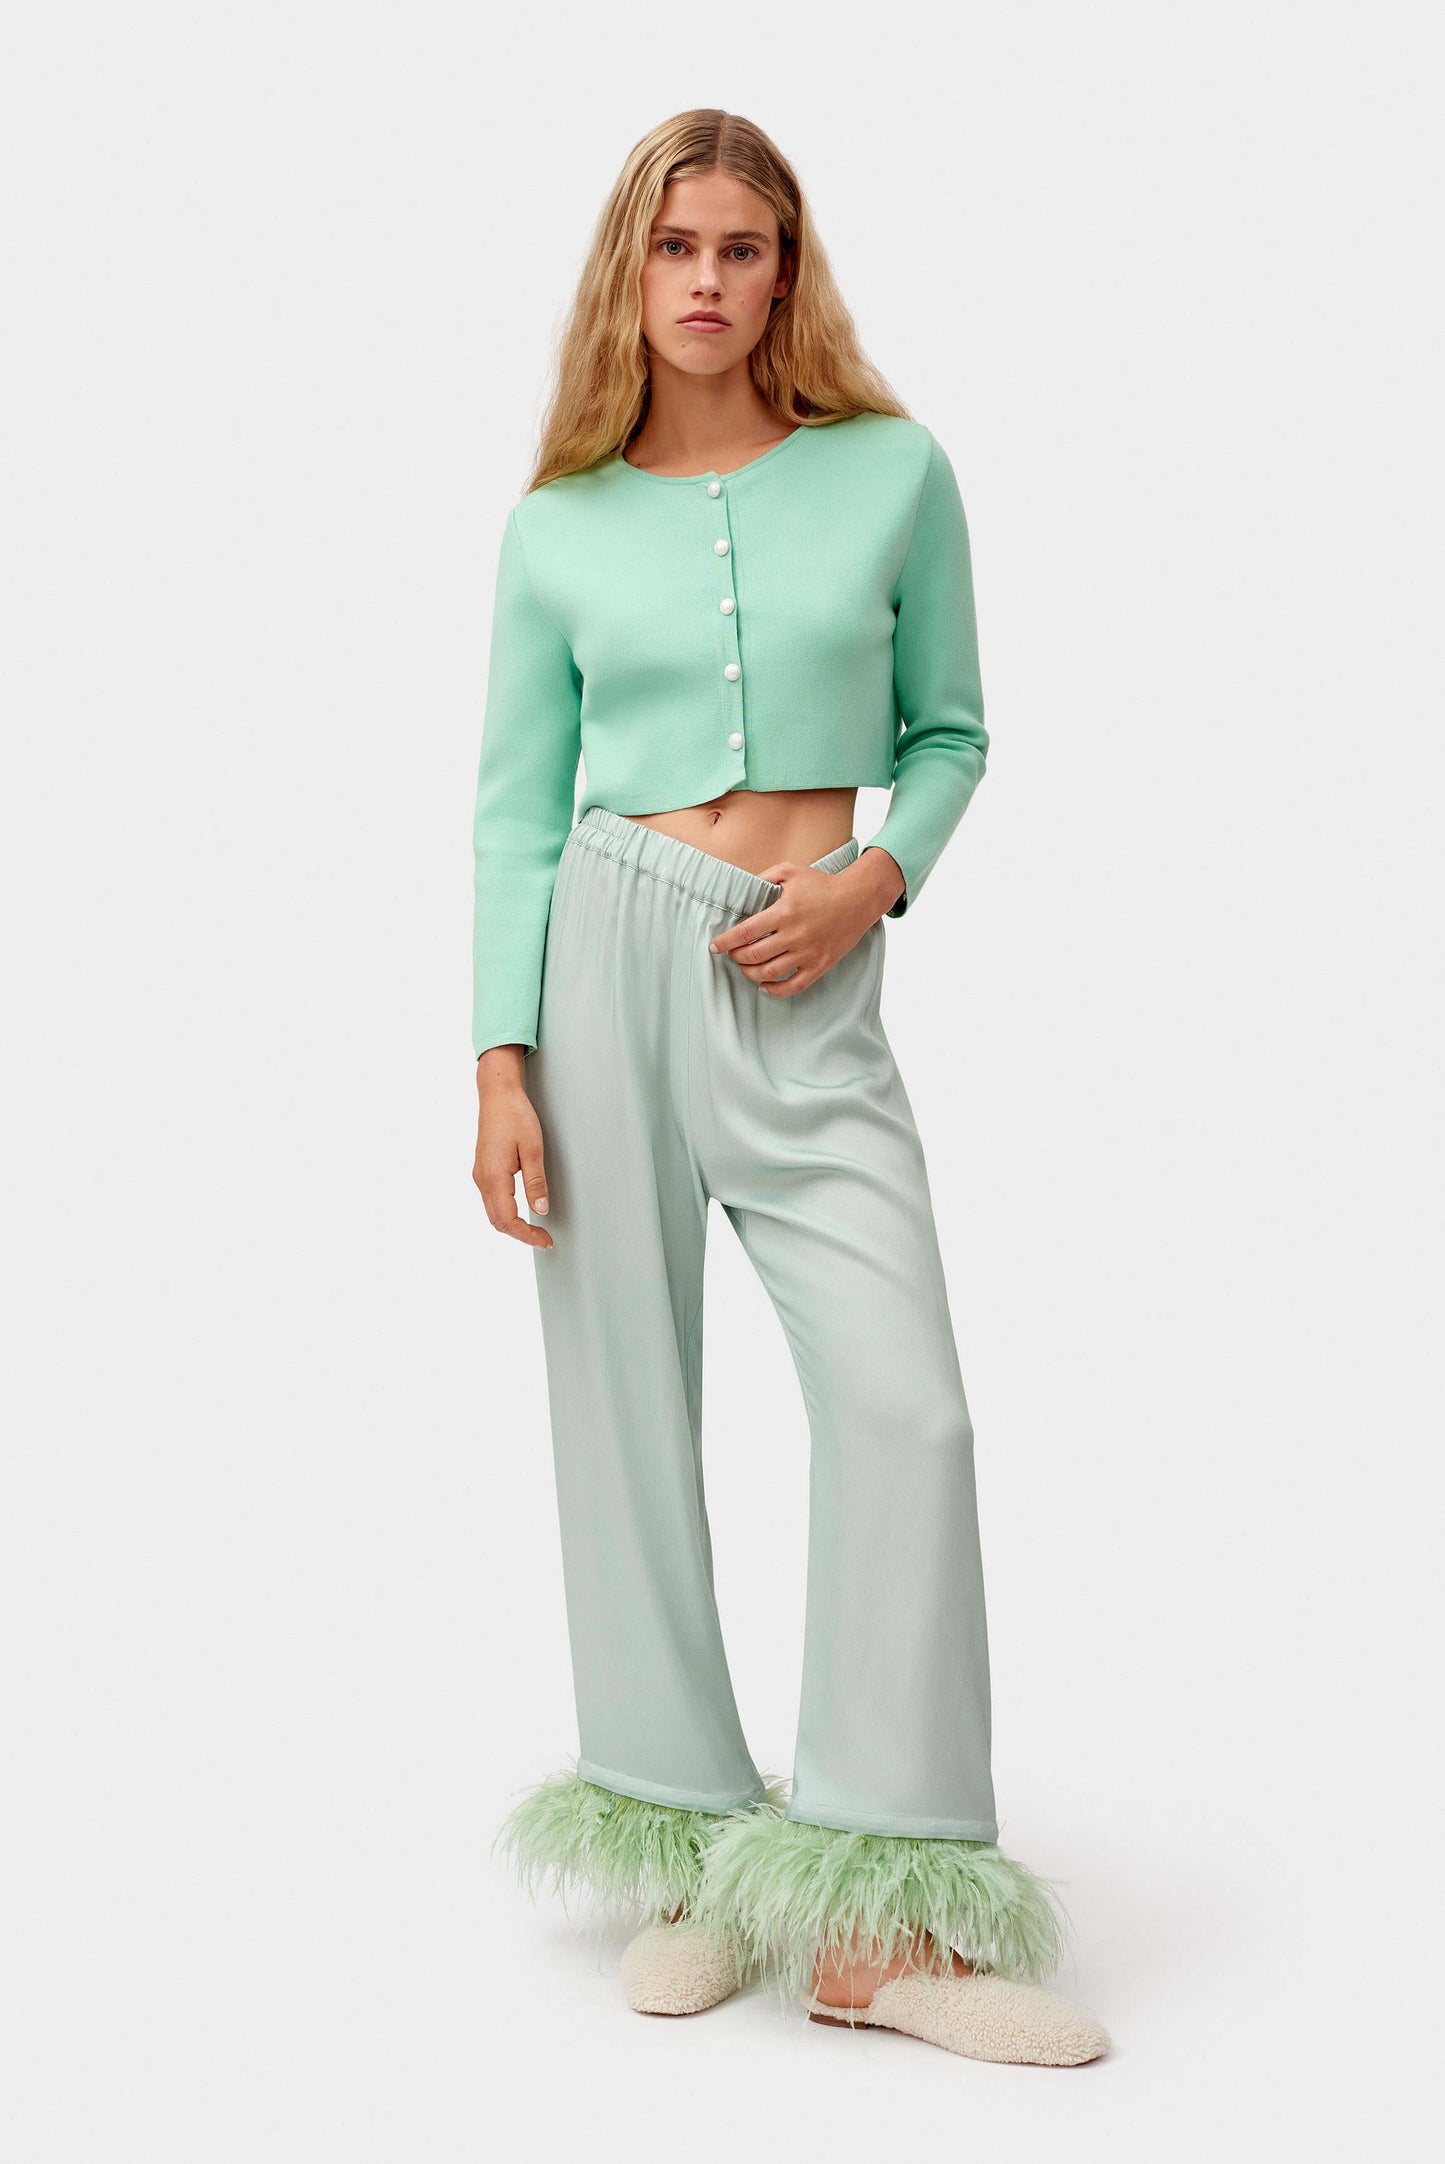 Party Pajamas Pants with Detachable Feathers in Mint